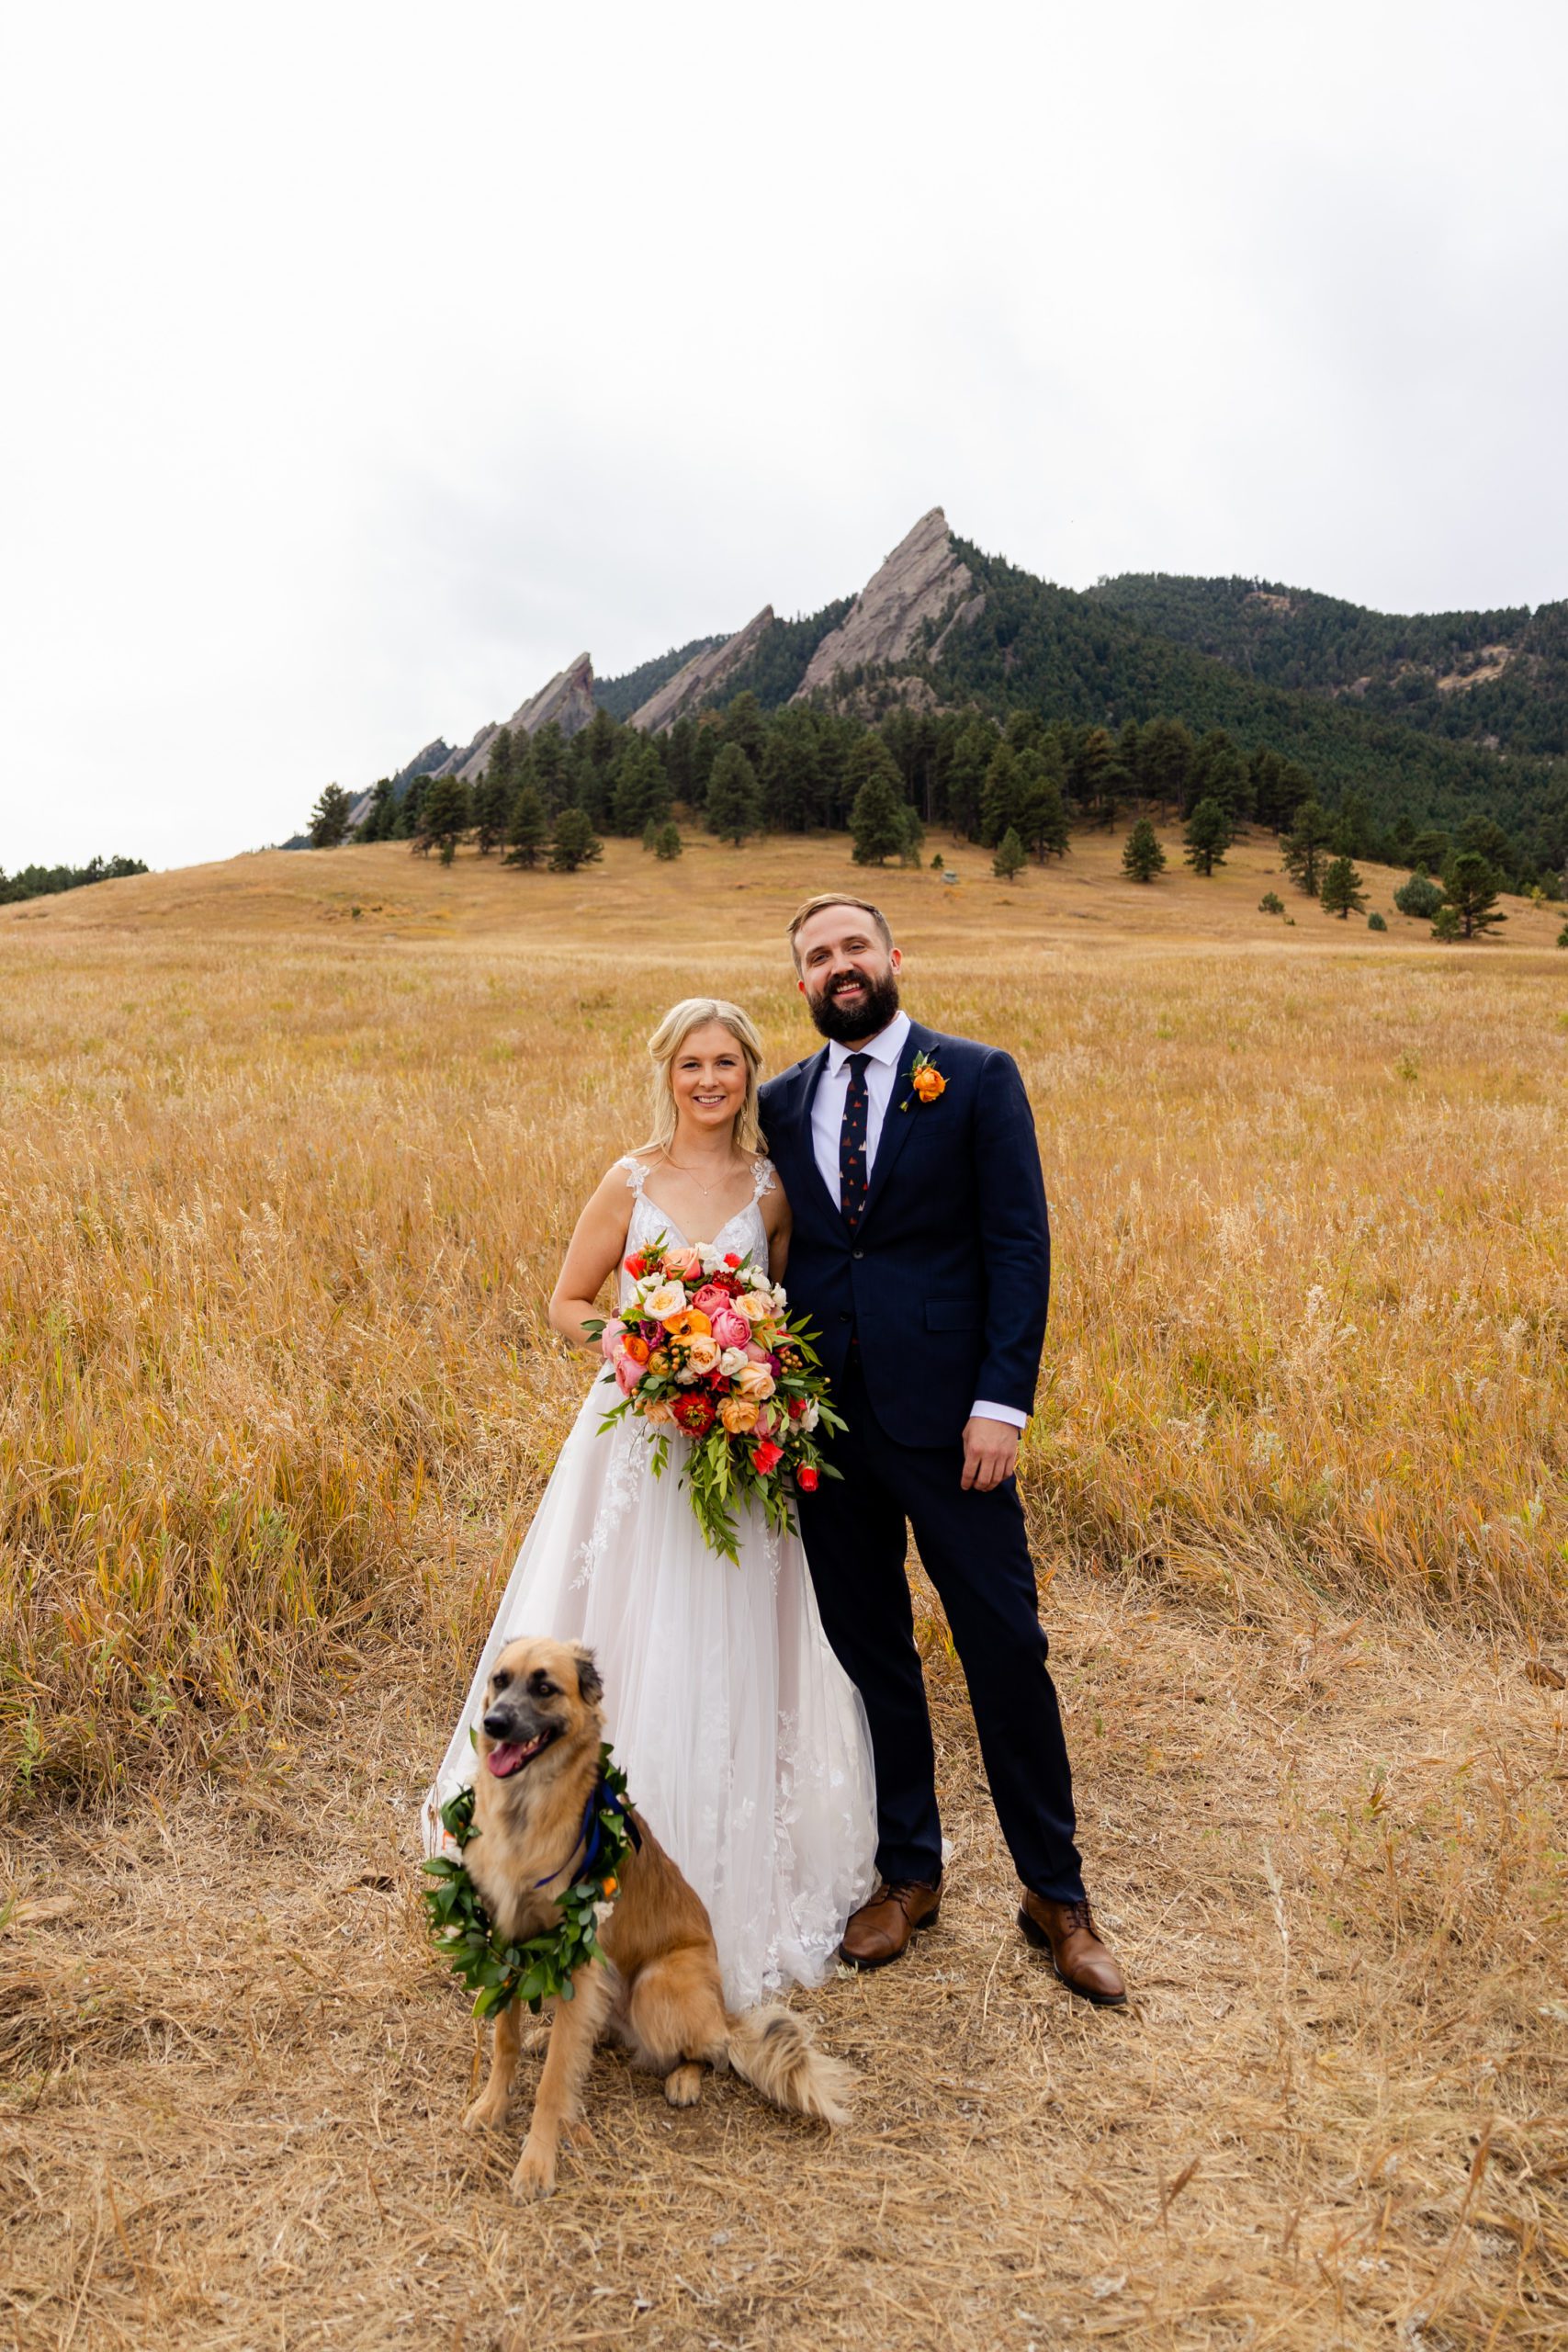 Bride and groom wedding photo with dog on Chautauqua Trail in Boulder